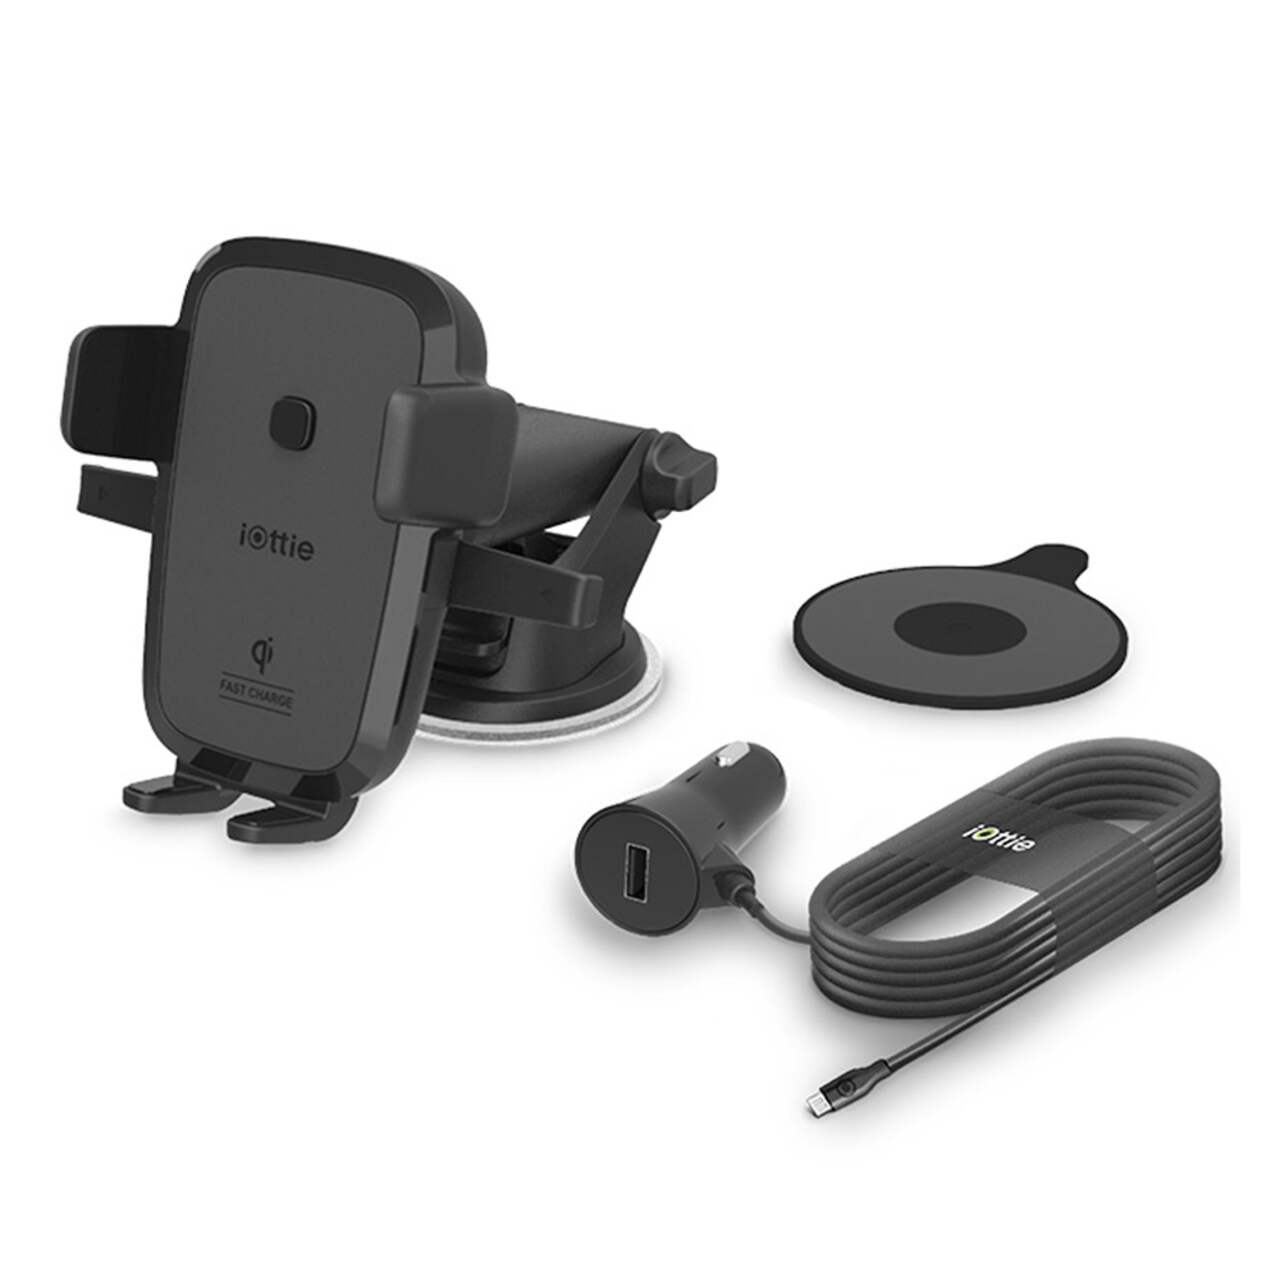 https://media-www.canadiantire.ca/product/automotive/car-care-accessories/auto-electronics/2748015/iottie-easy-one-touch-wireless-charging-dash-mount-blk-1086b308-e2c1-405b-9b38-387b5b38aab5.png?imdensity=1&imwidth=640&impolicy=mZoom